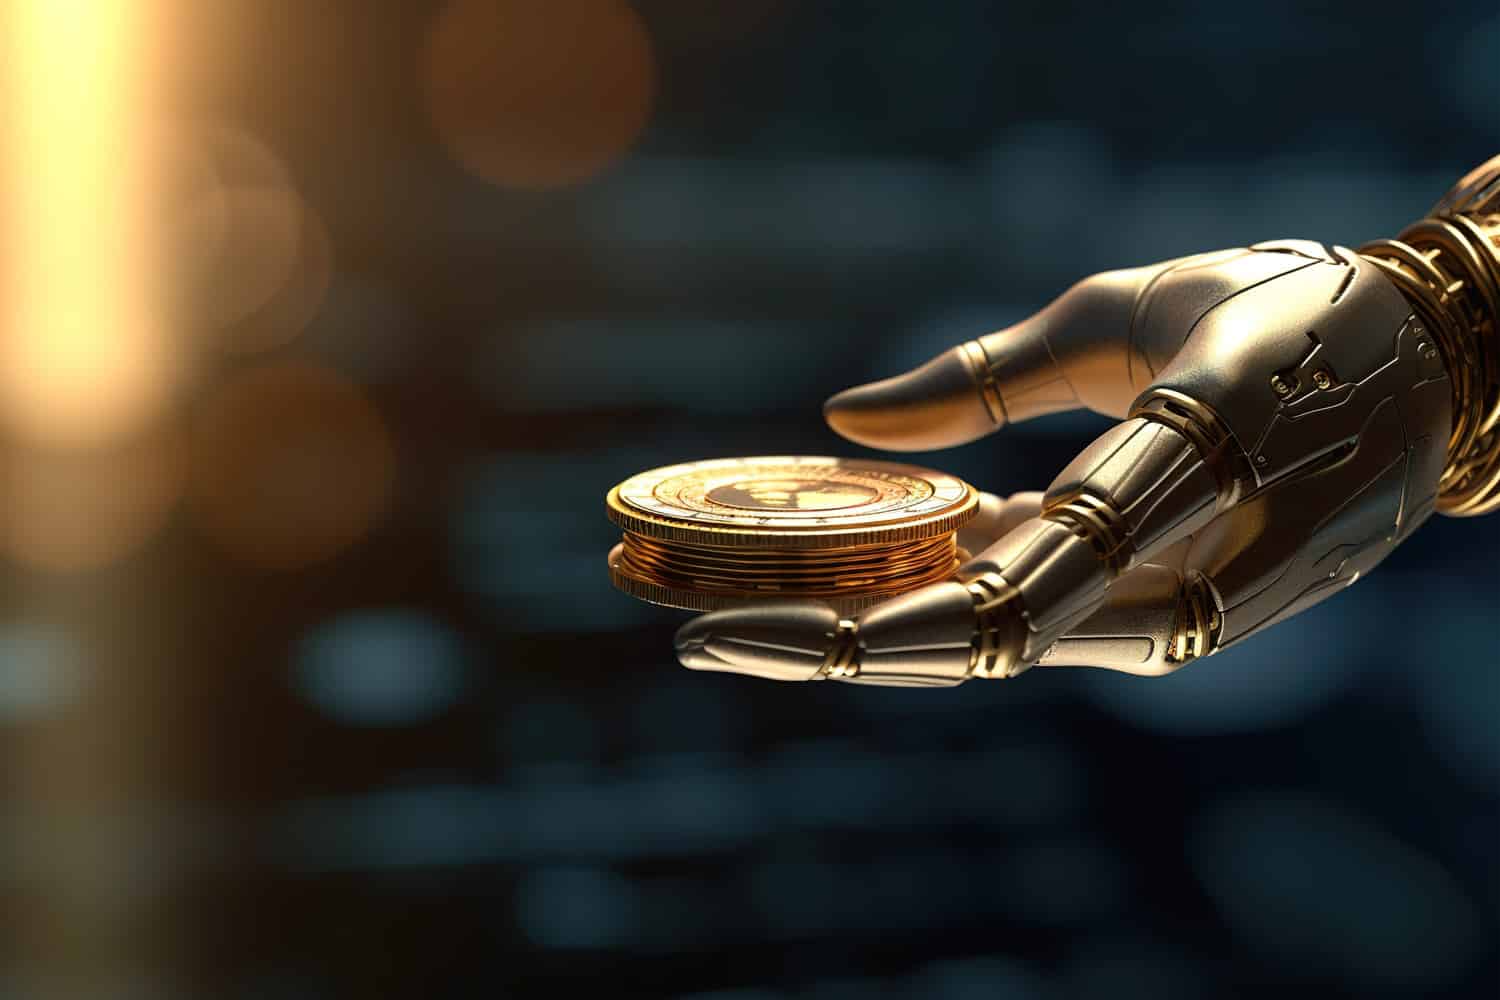 A robotic hand holding a pile of gold-colored coins intended to represent cryptoassets.